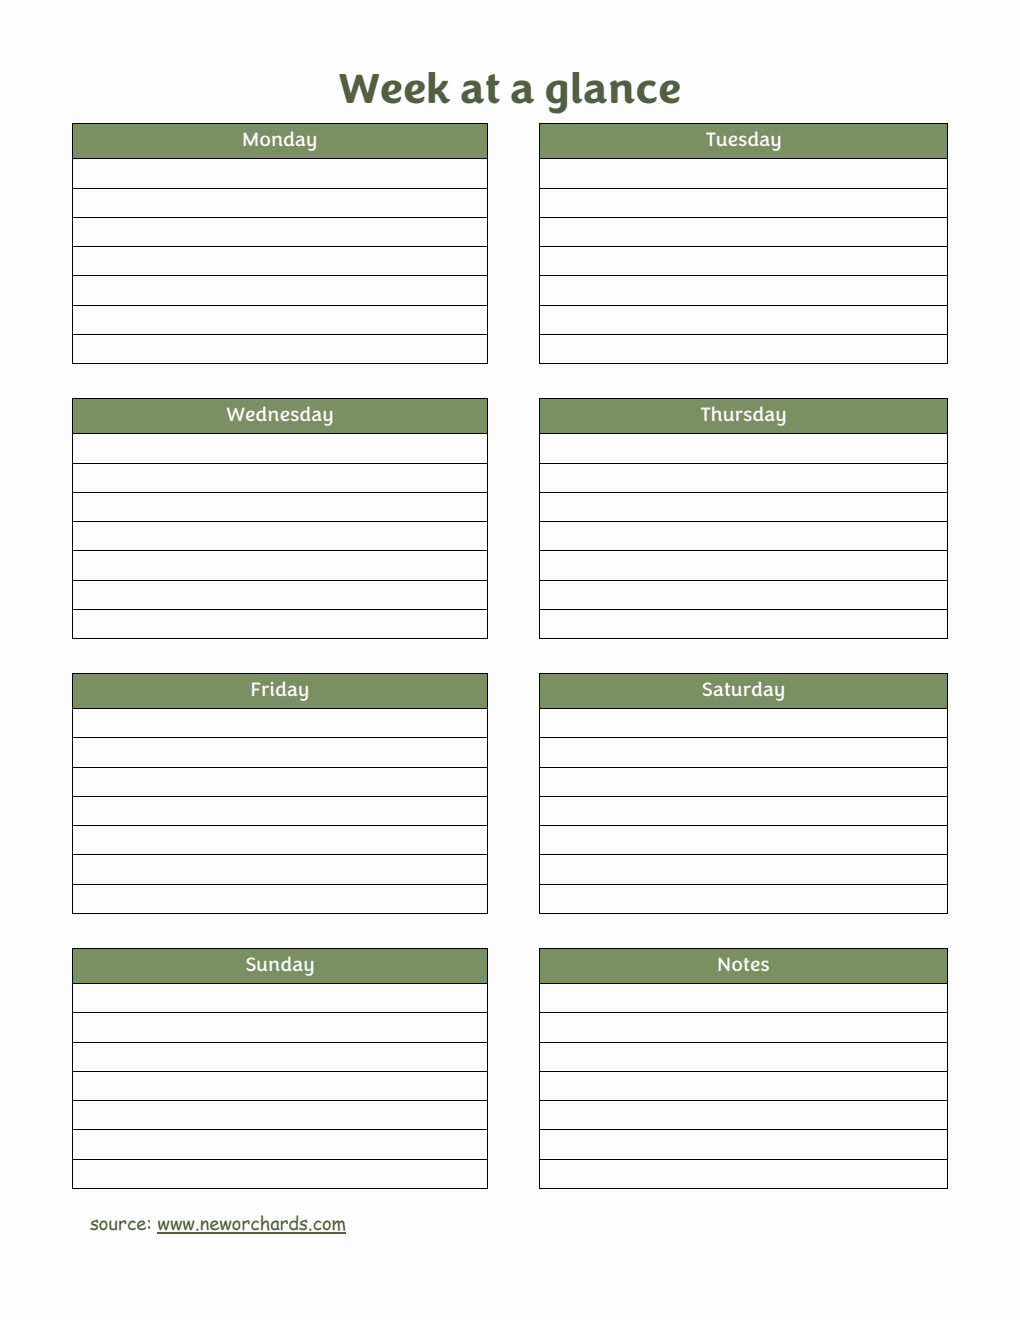  Week at a Glance Template (Word)